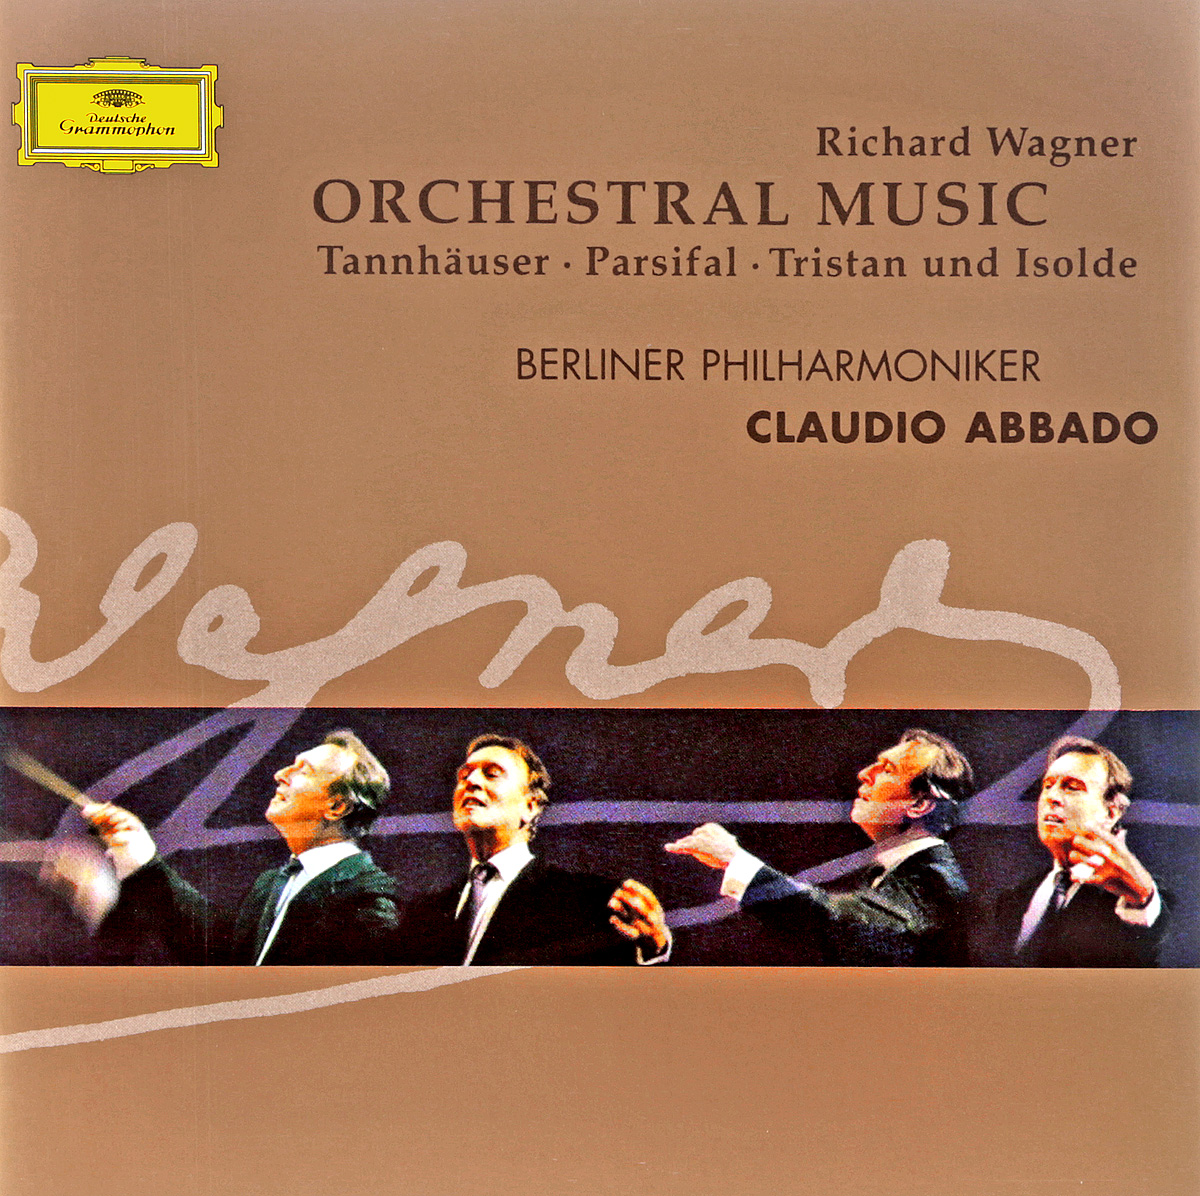 Wagner: Orchestral Music Berlin P.o. Claudio Abbado: Tannhauser / Parsifal / Tristan